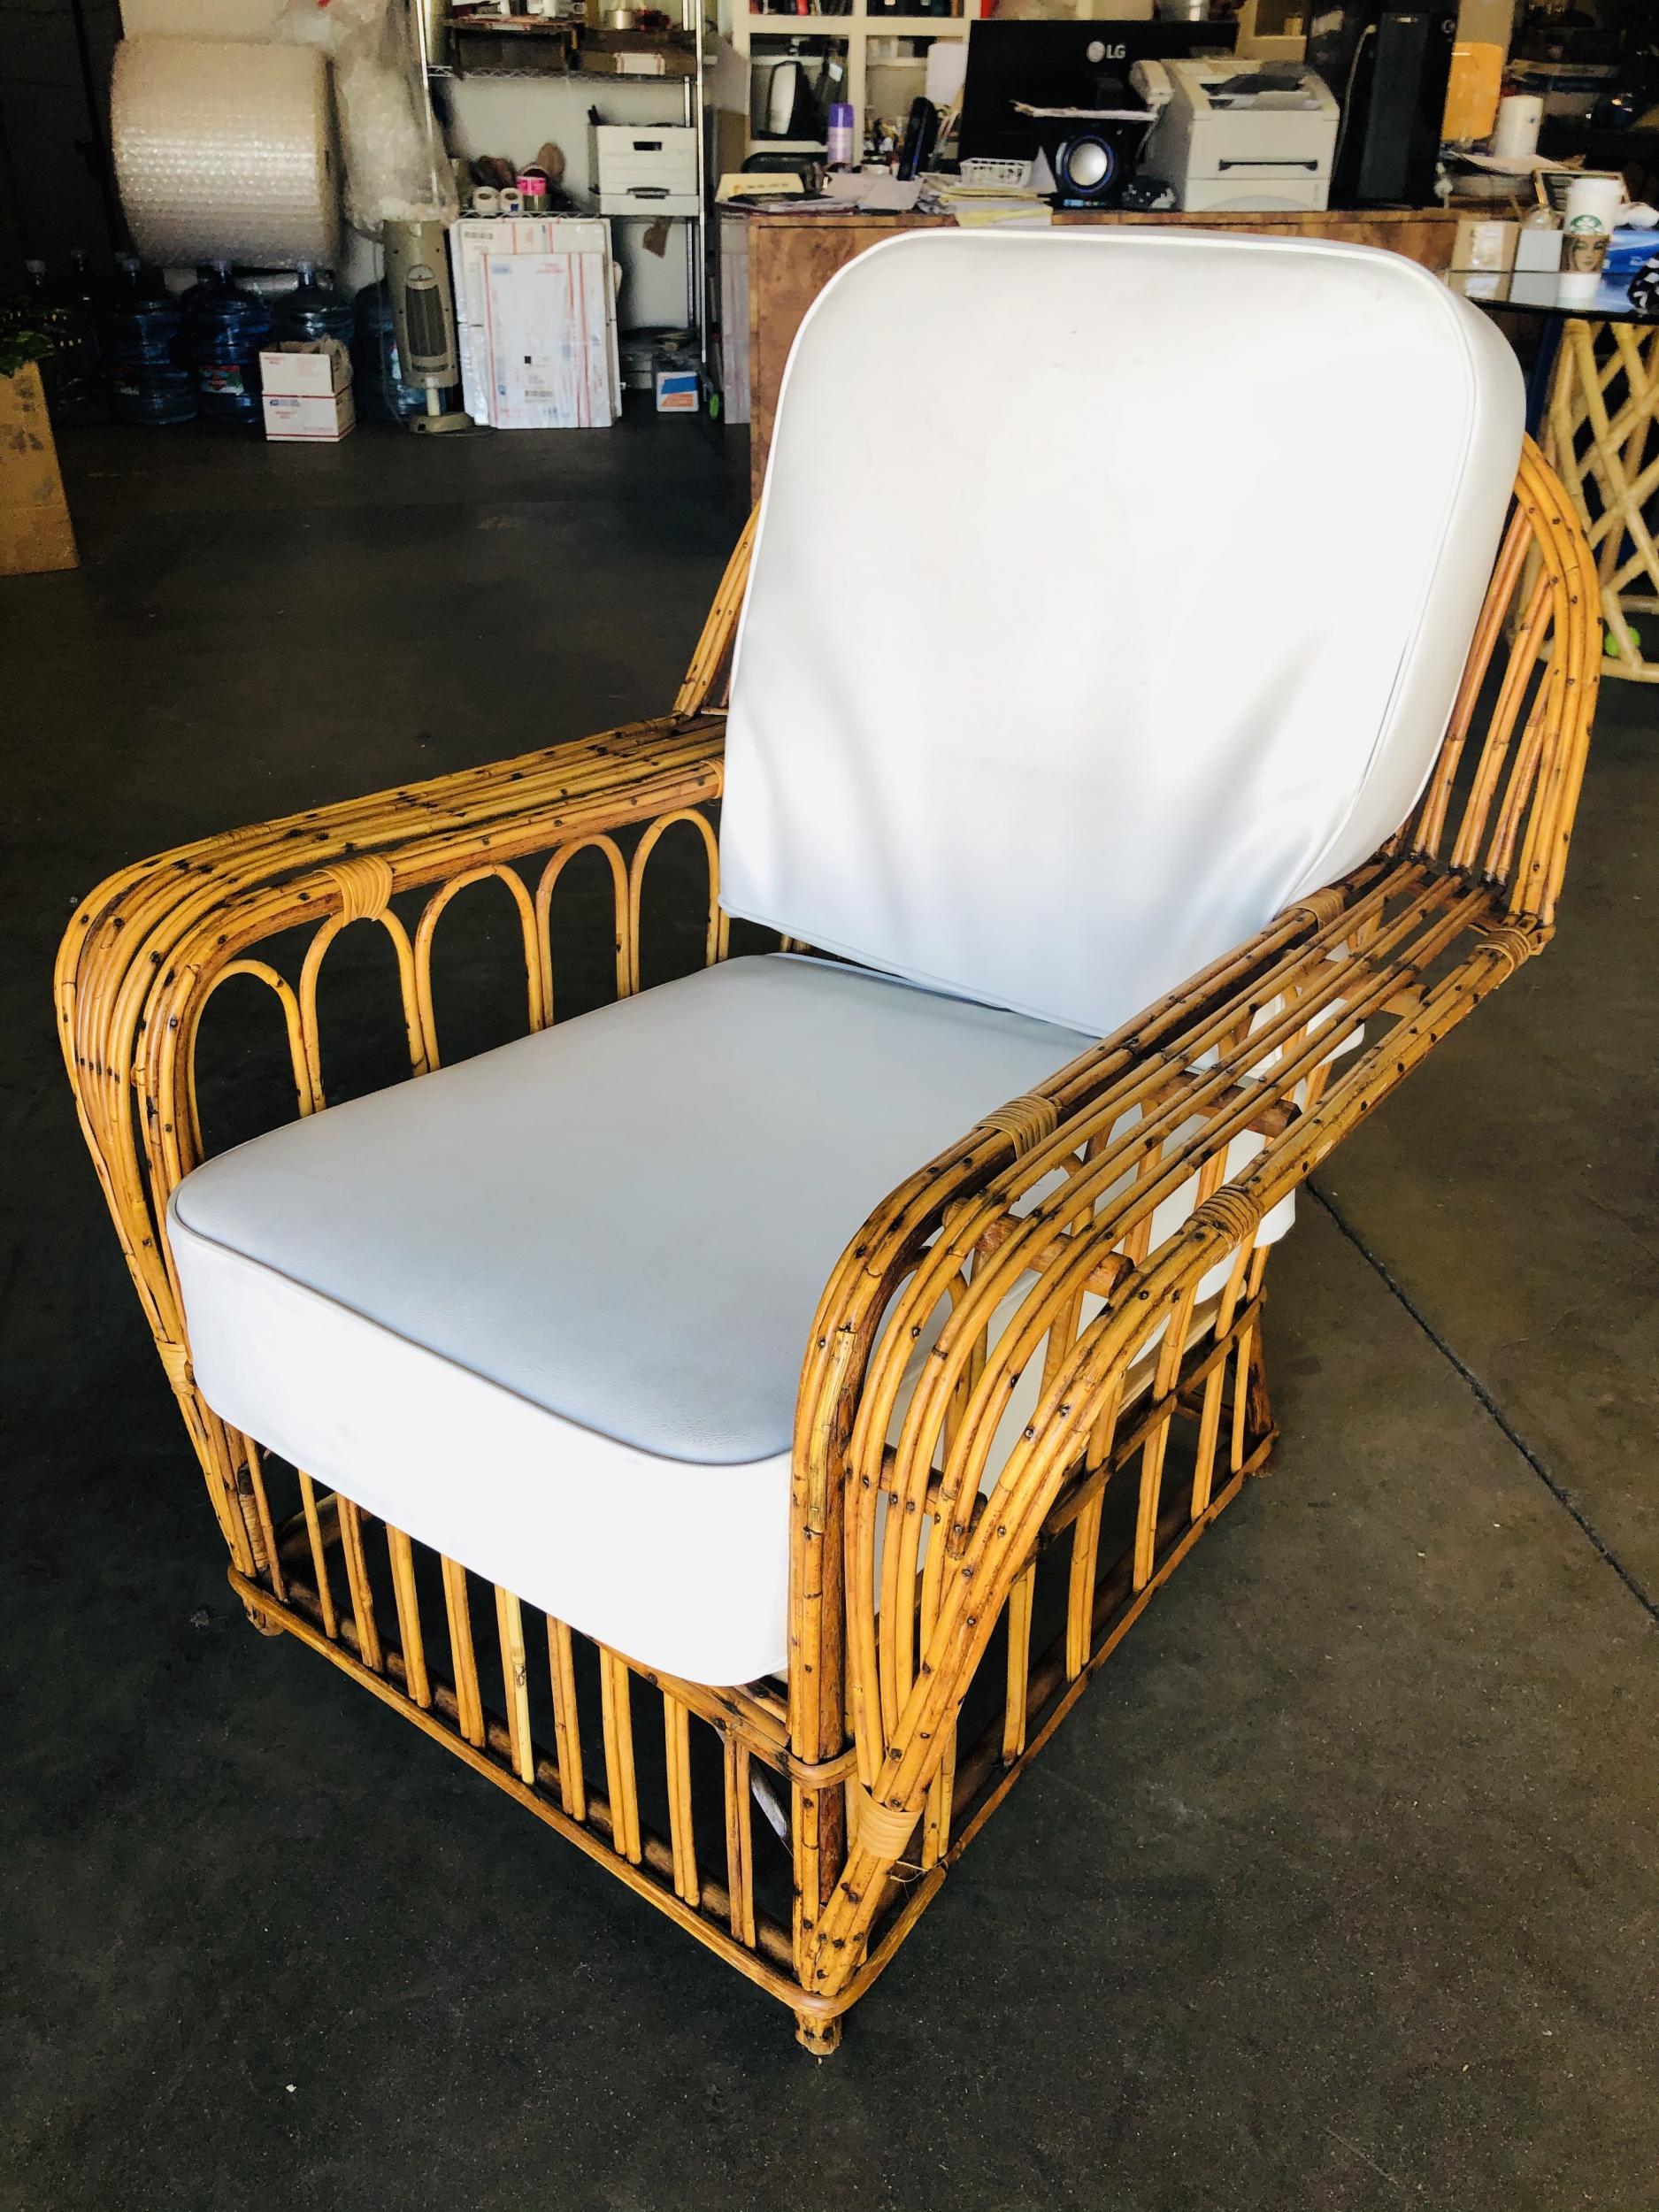 This Art Deco era rattan lounge chair with multi-strand stick rattan arms forming a Gothic cathedral style arches along the side with a seat back that fans out to a cobra shape.

Custom cushions are included in the price. Simply supply the fabric